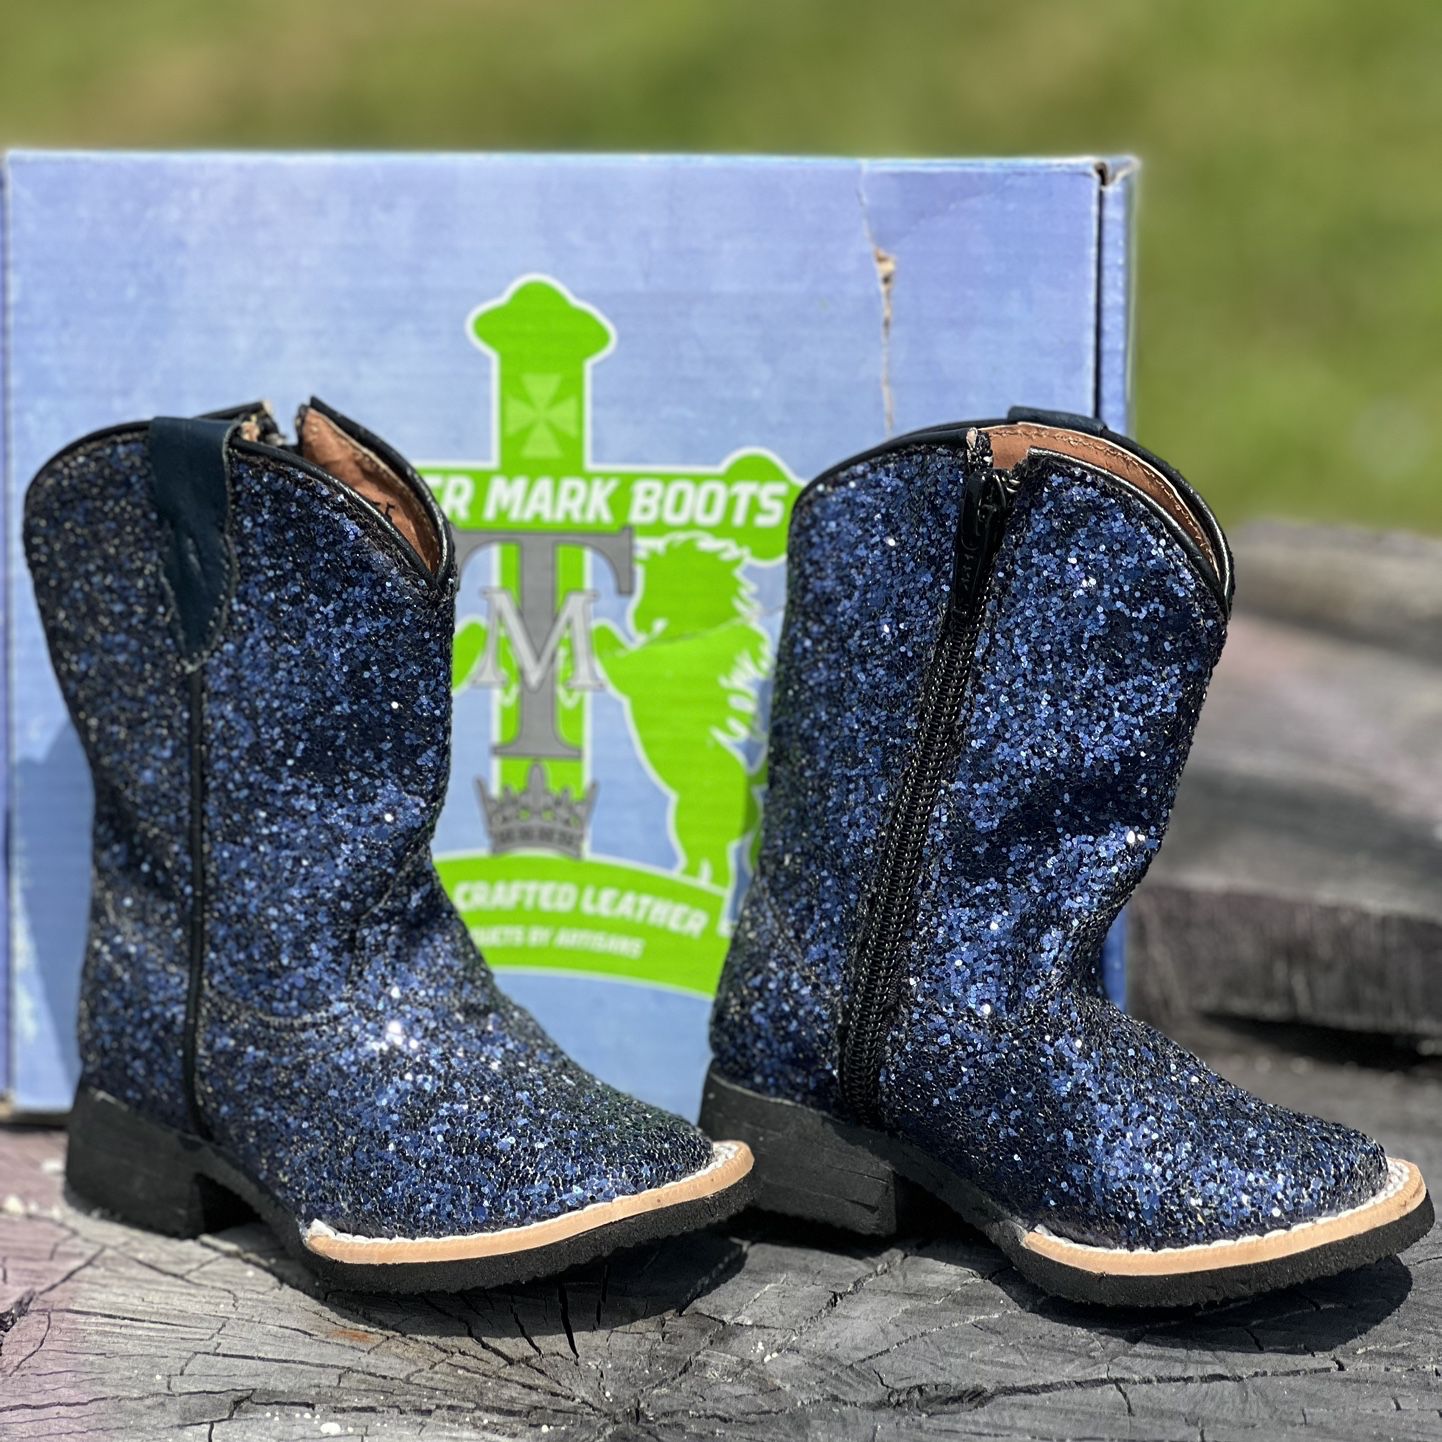 Tanner Mark Blue Boots 